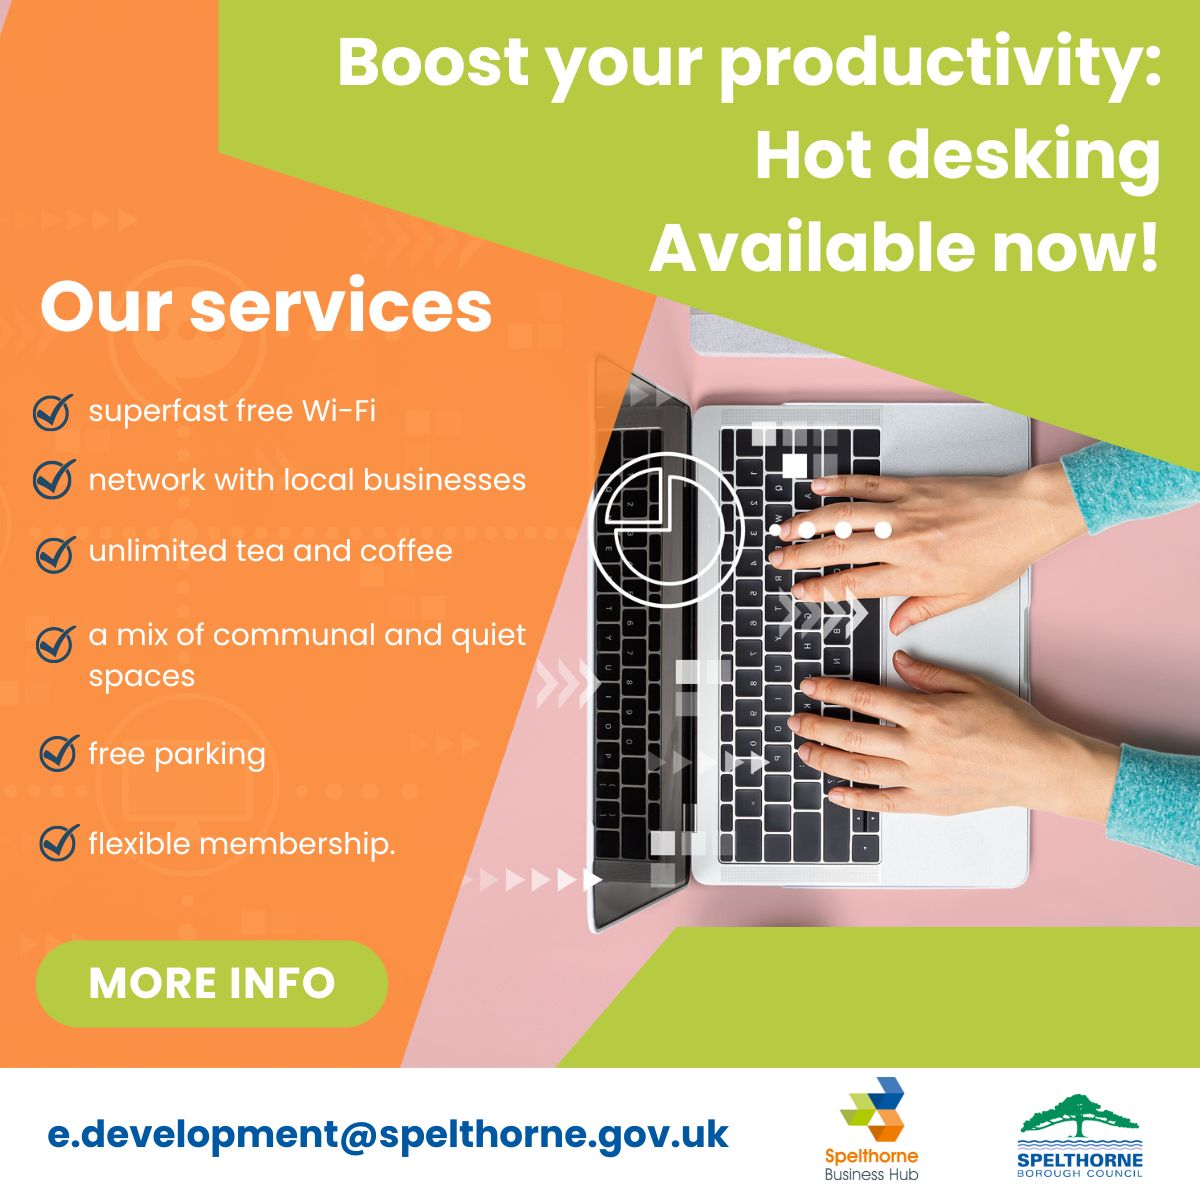 Wondering where to find a productive atmosphere tailored to your needs? Explore Spelthorne Business Hub's hot desks, offering flexibility, community, and opportunity. Are you ready to seize the day with us? #ProductiveDay #SpelthorneBusinessHub #SpelthorneBoroughCouncil